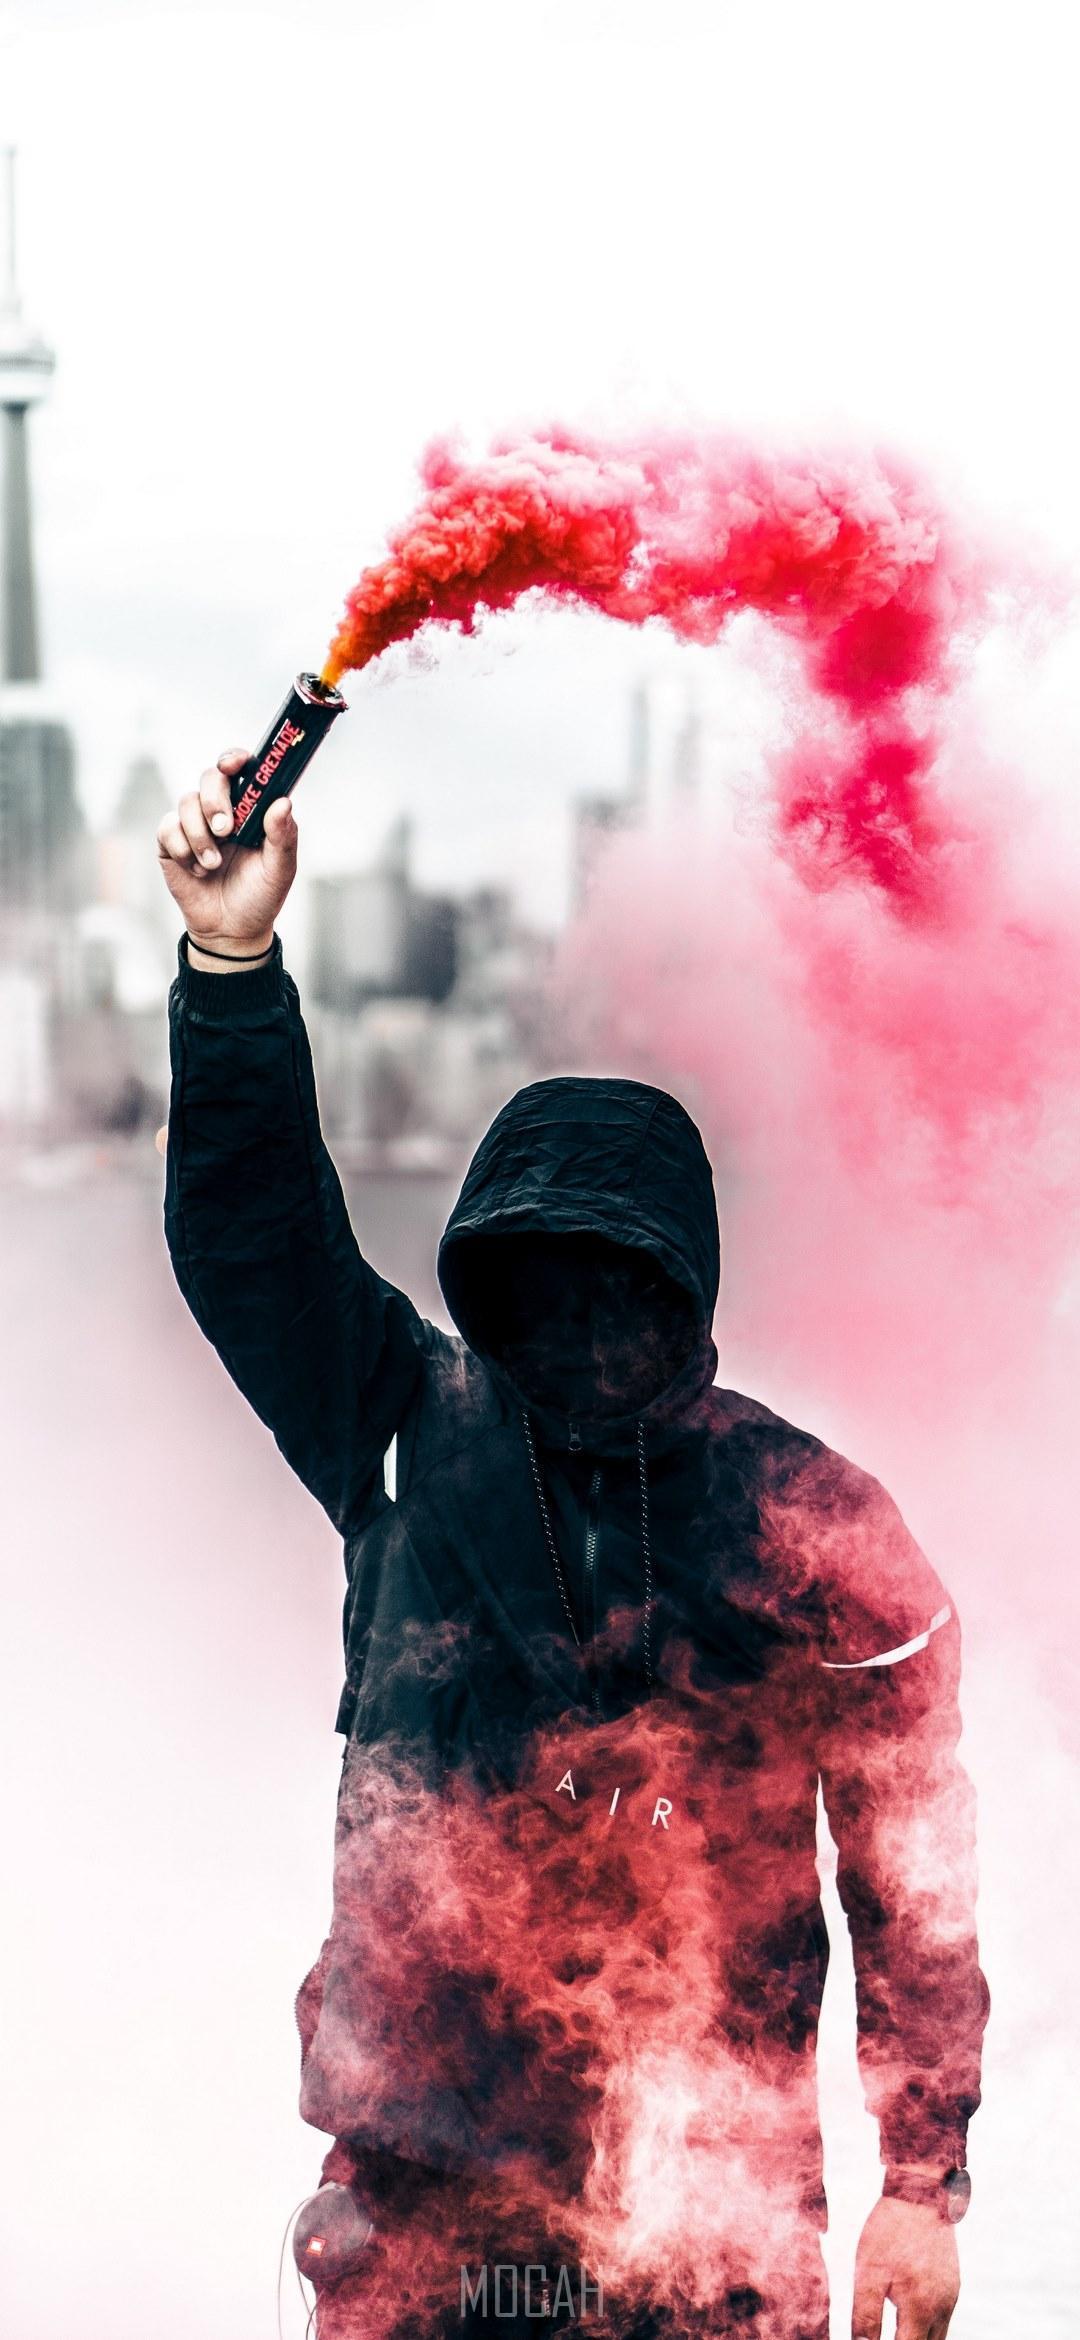 HD wallpaper, A Person In A Black Hoodie With Obscured Face Holds Up A Pink Smoke Grenade, Person With Pink Smoke Grenade, Google Pixel 4A 5G Screensaver, 1080X2340